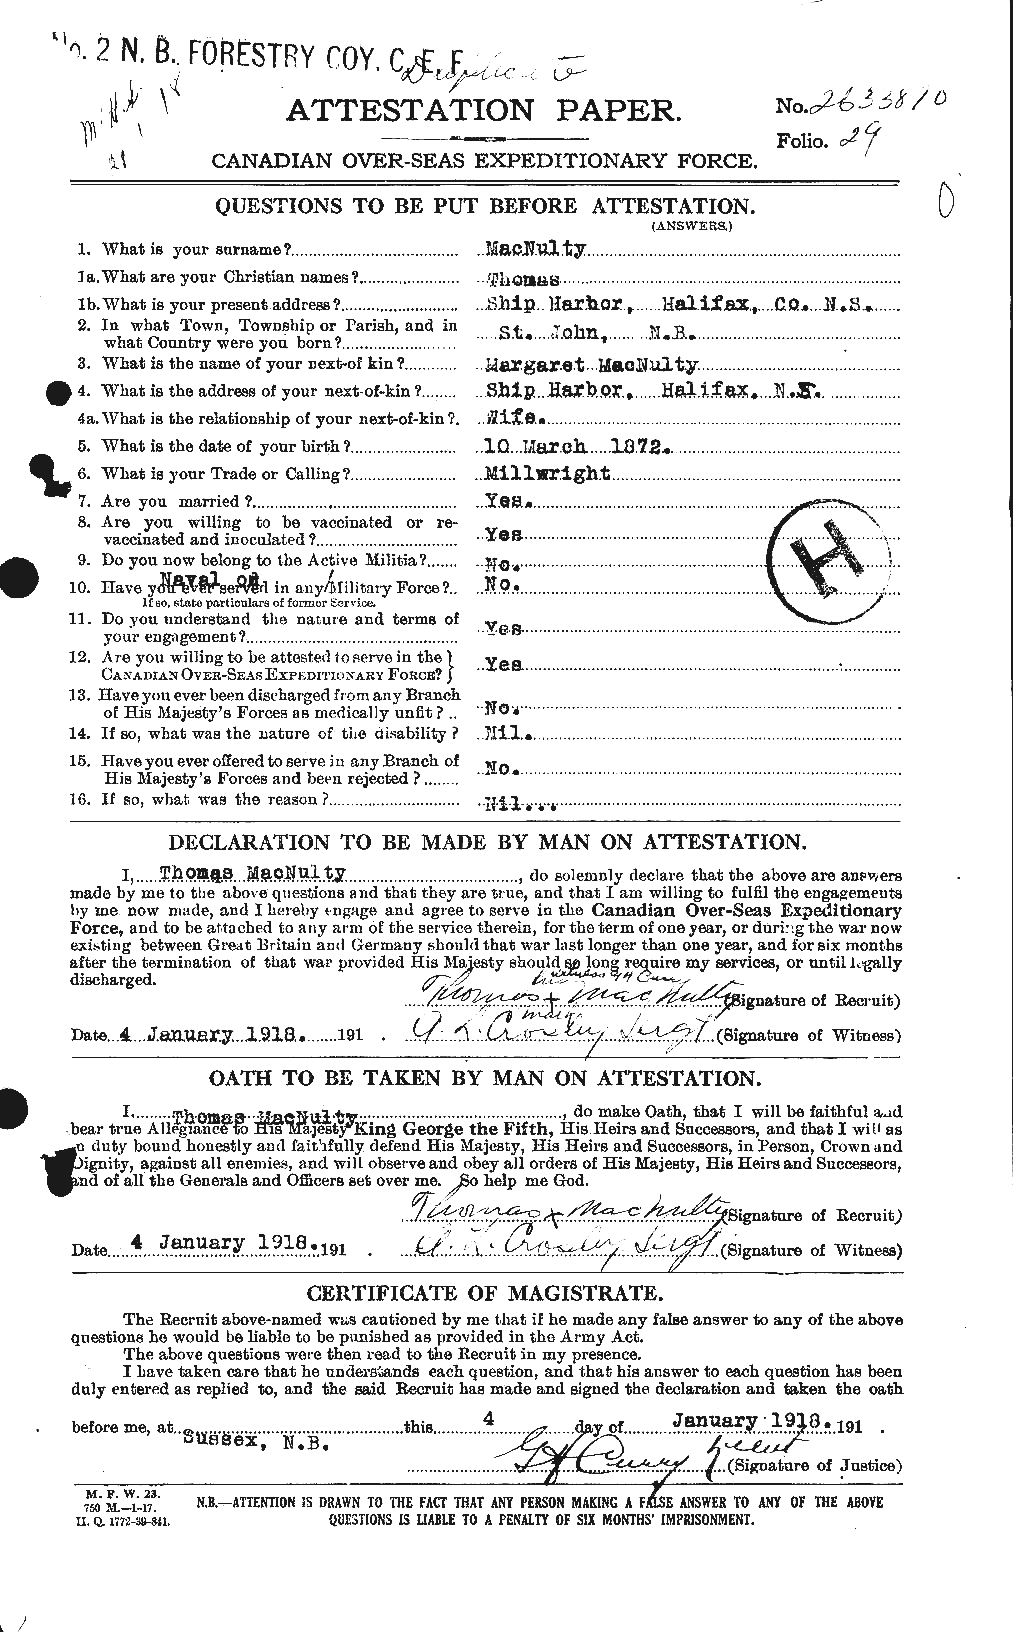 Personnel Records of the First World War - CEF 541957a